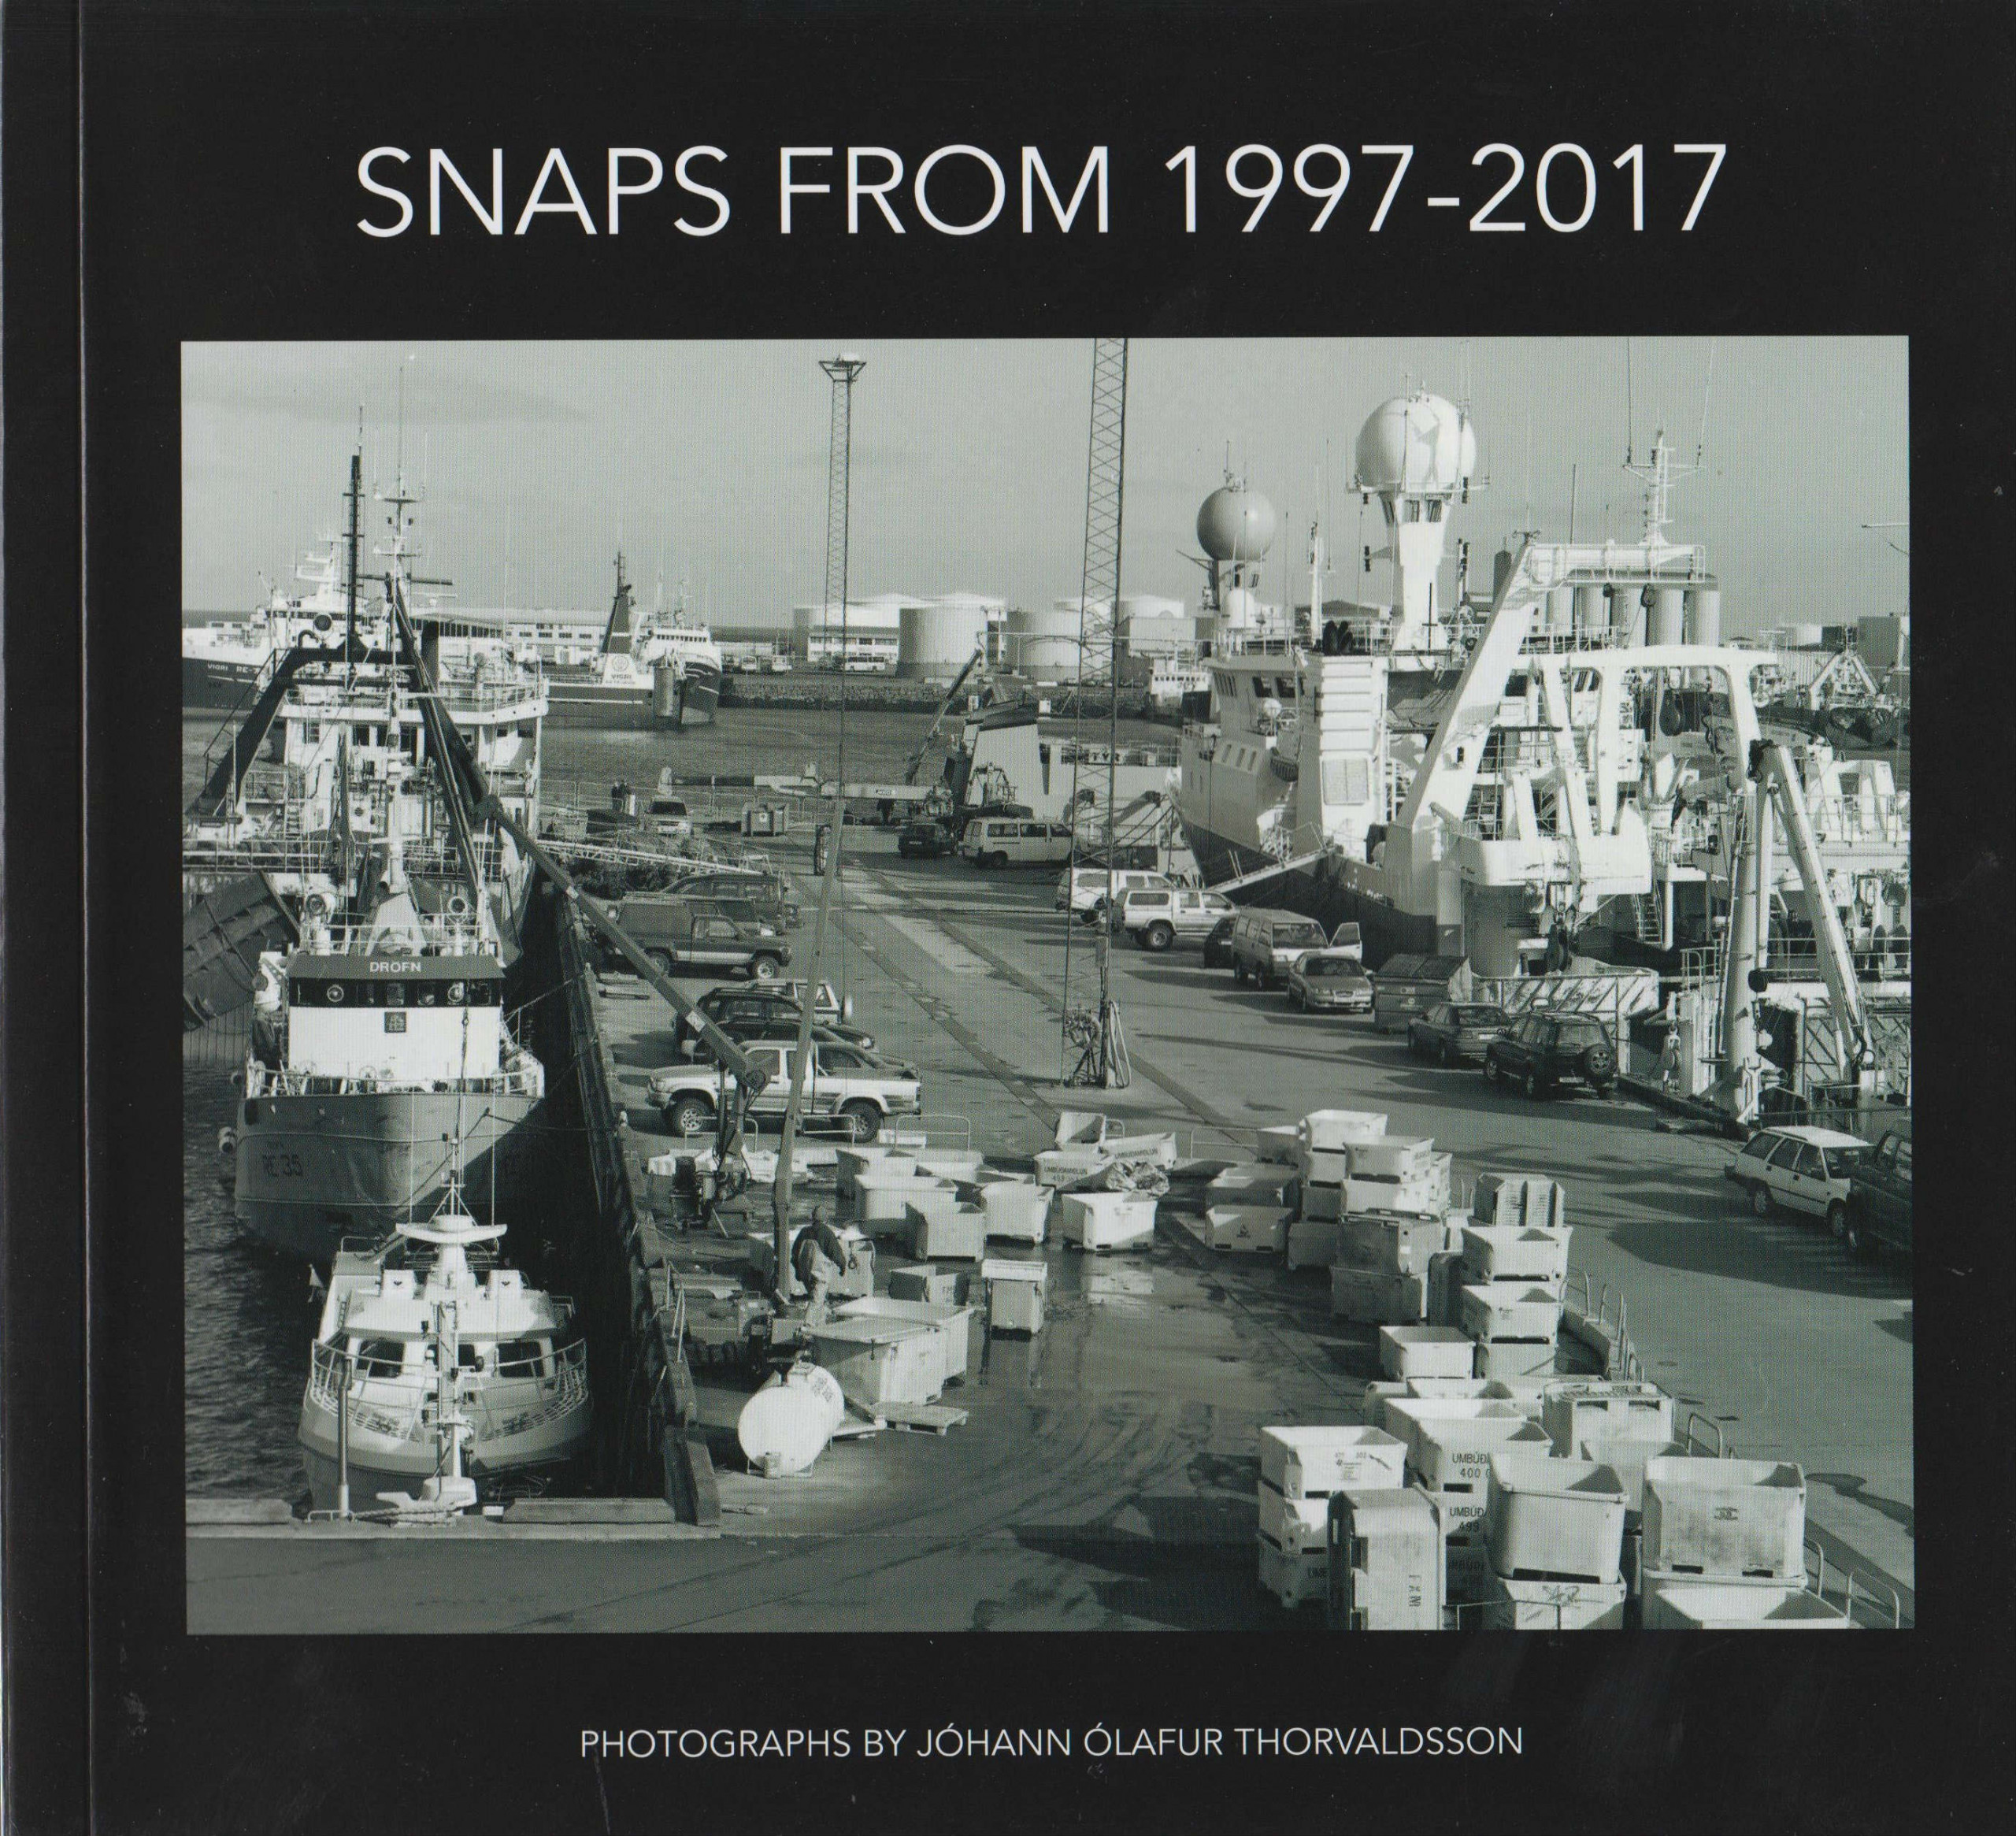 Snaps from 1997-2017